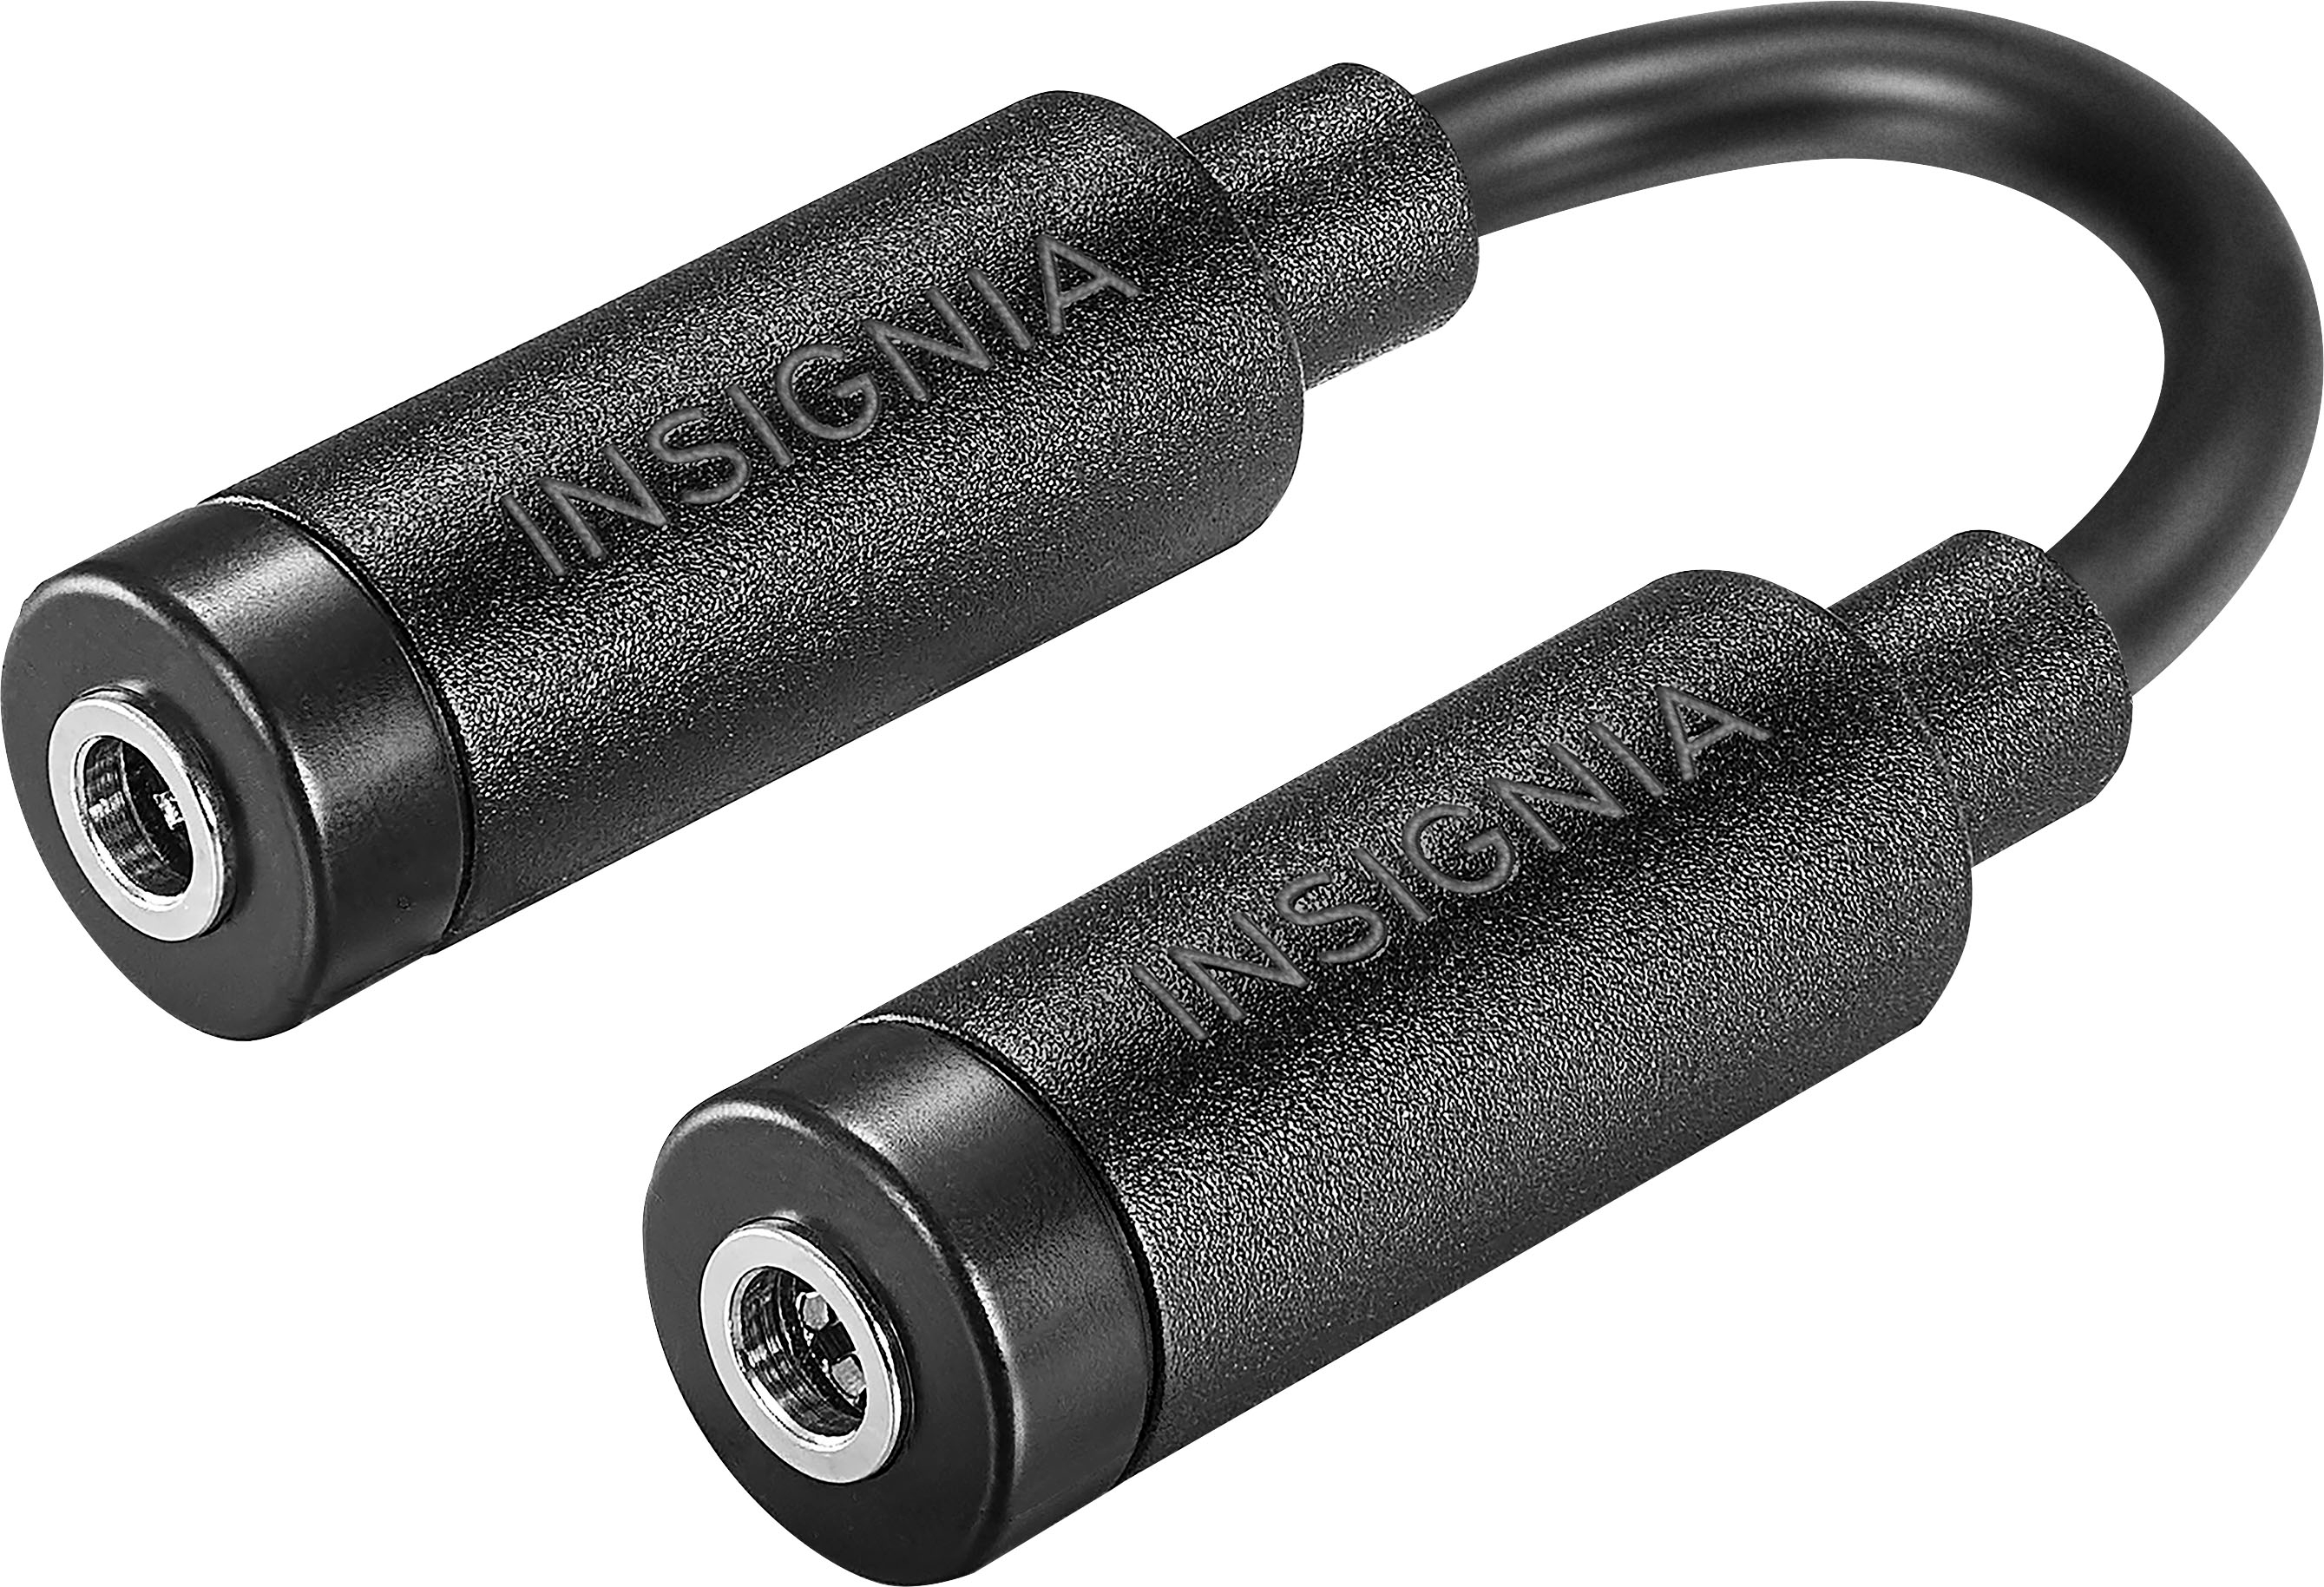 Cable usb tipo c 4' (10.16 cm)